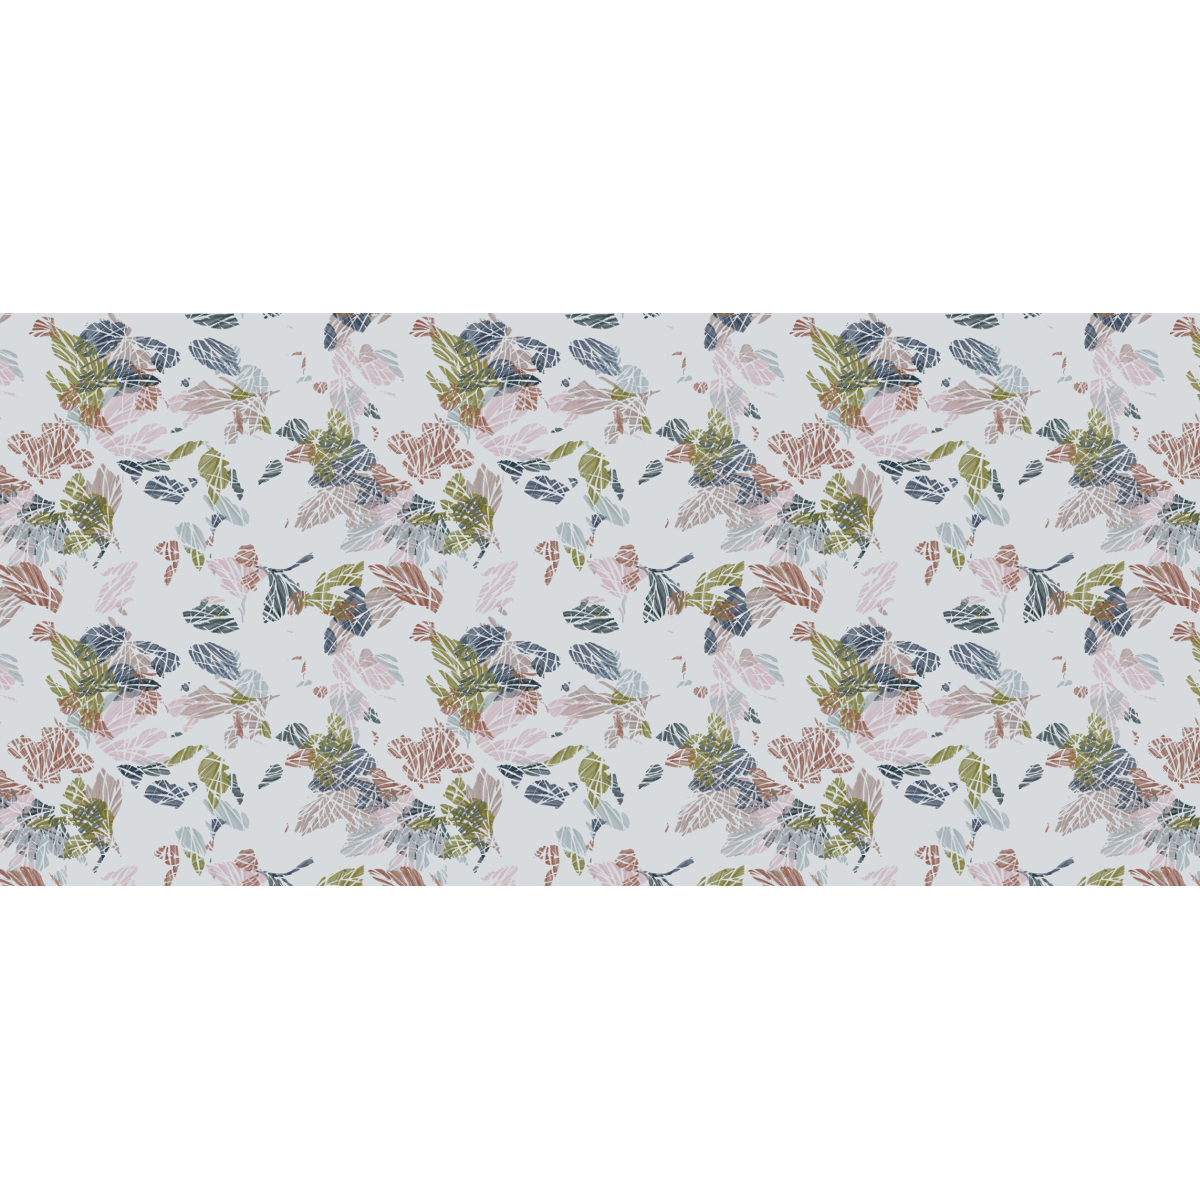 Panoramic wallpaper with abstract leaf pattern - Studio Cymé collection - Acte-Deco